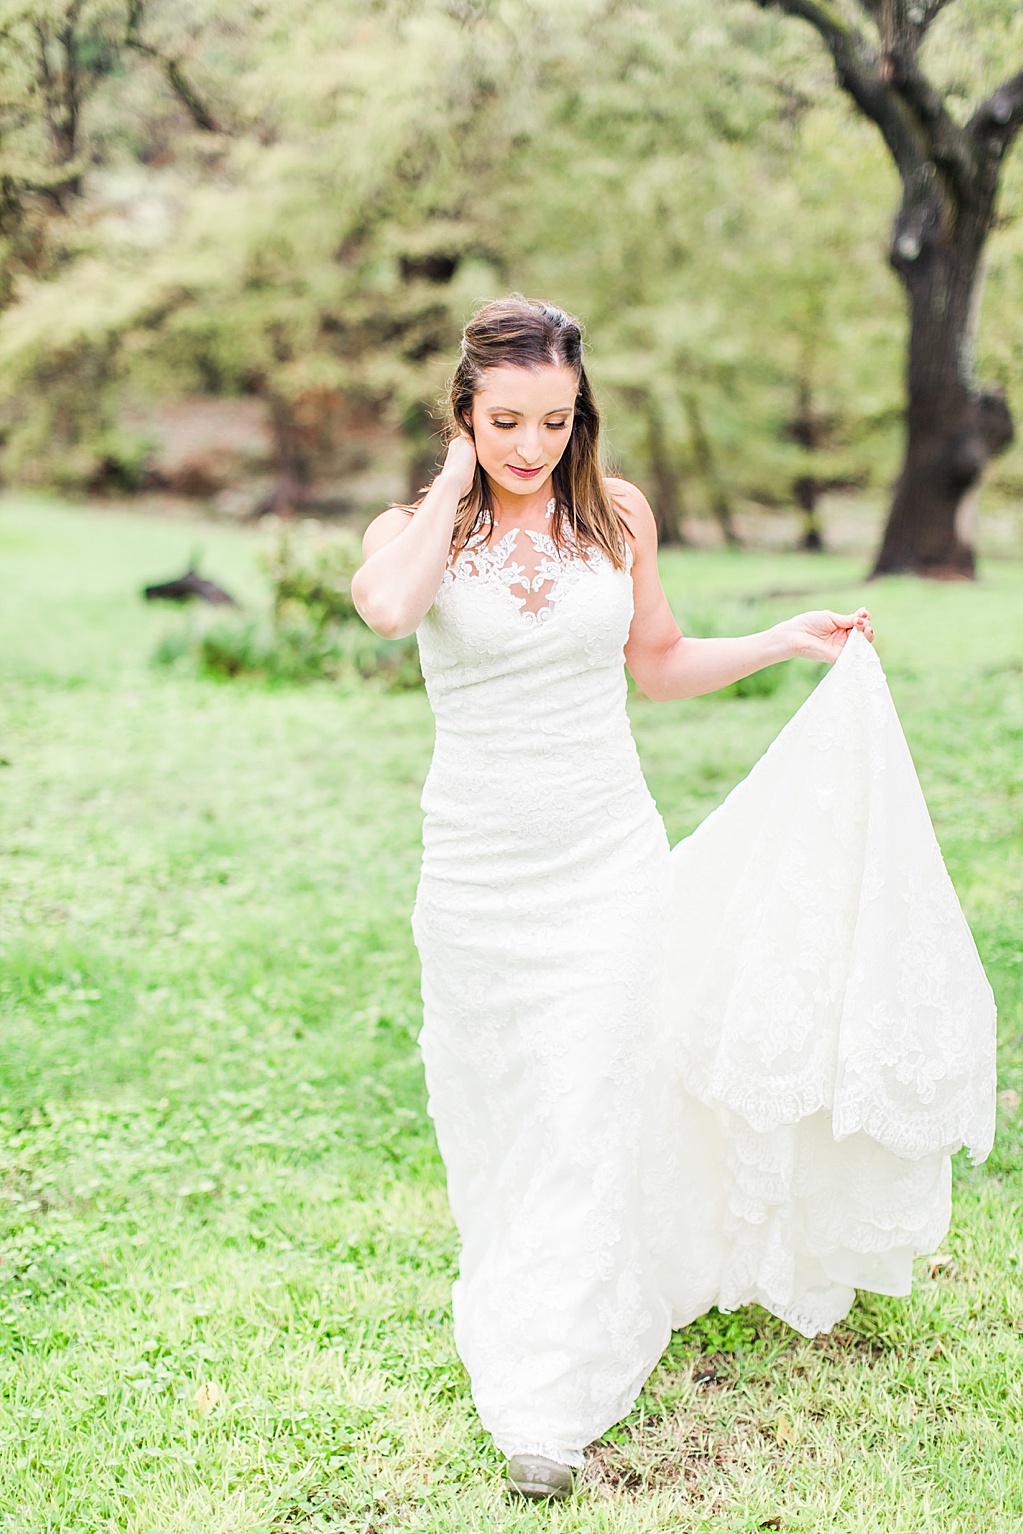 Rainy day bridal session at sisterdale dancehall in boerne texas 0015